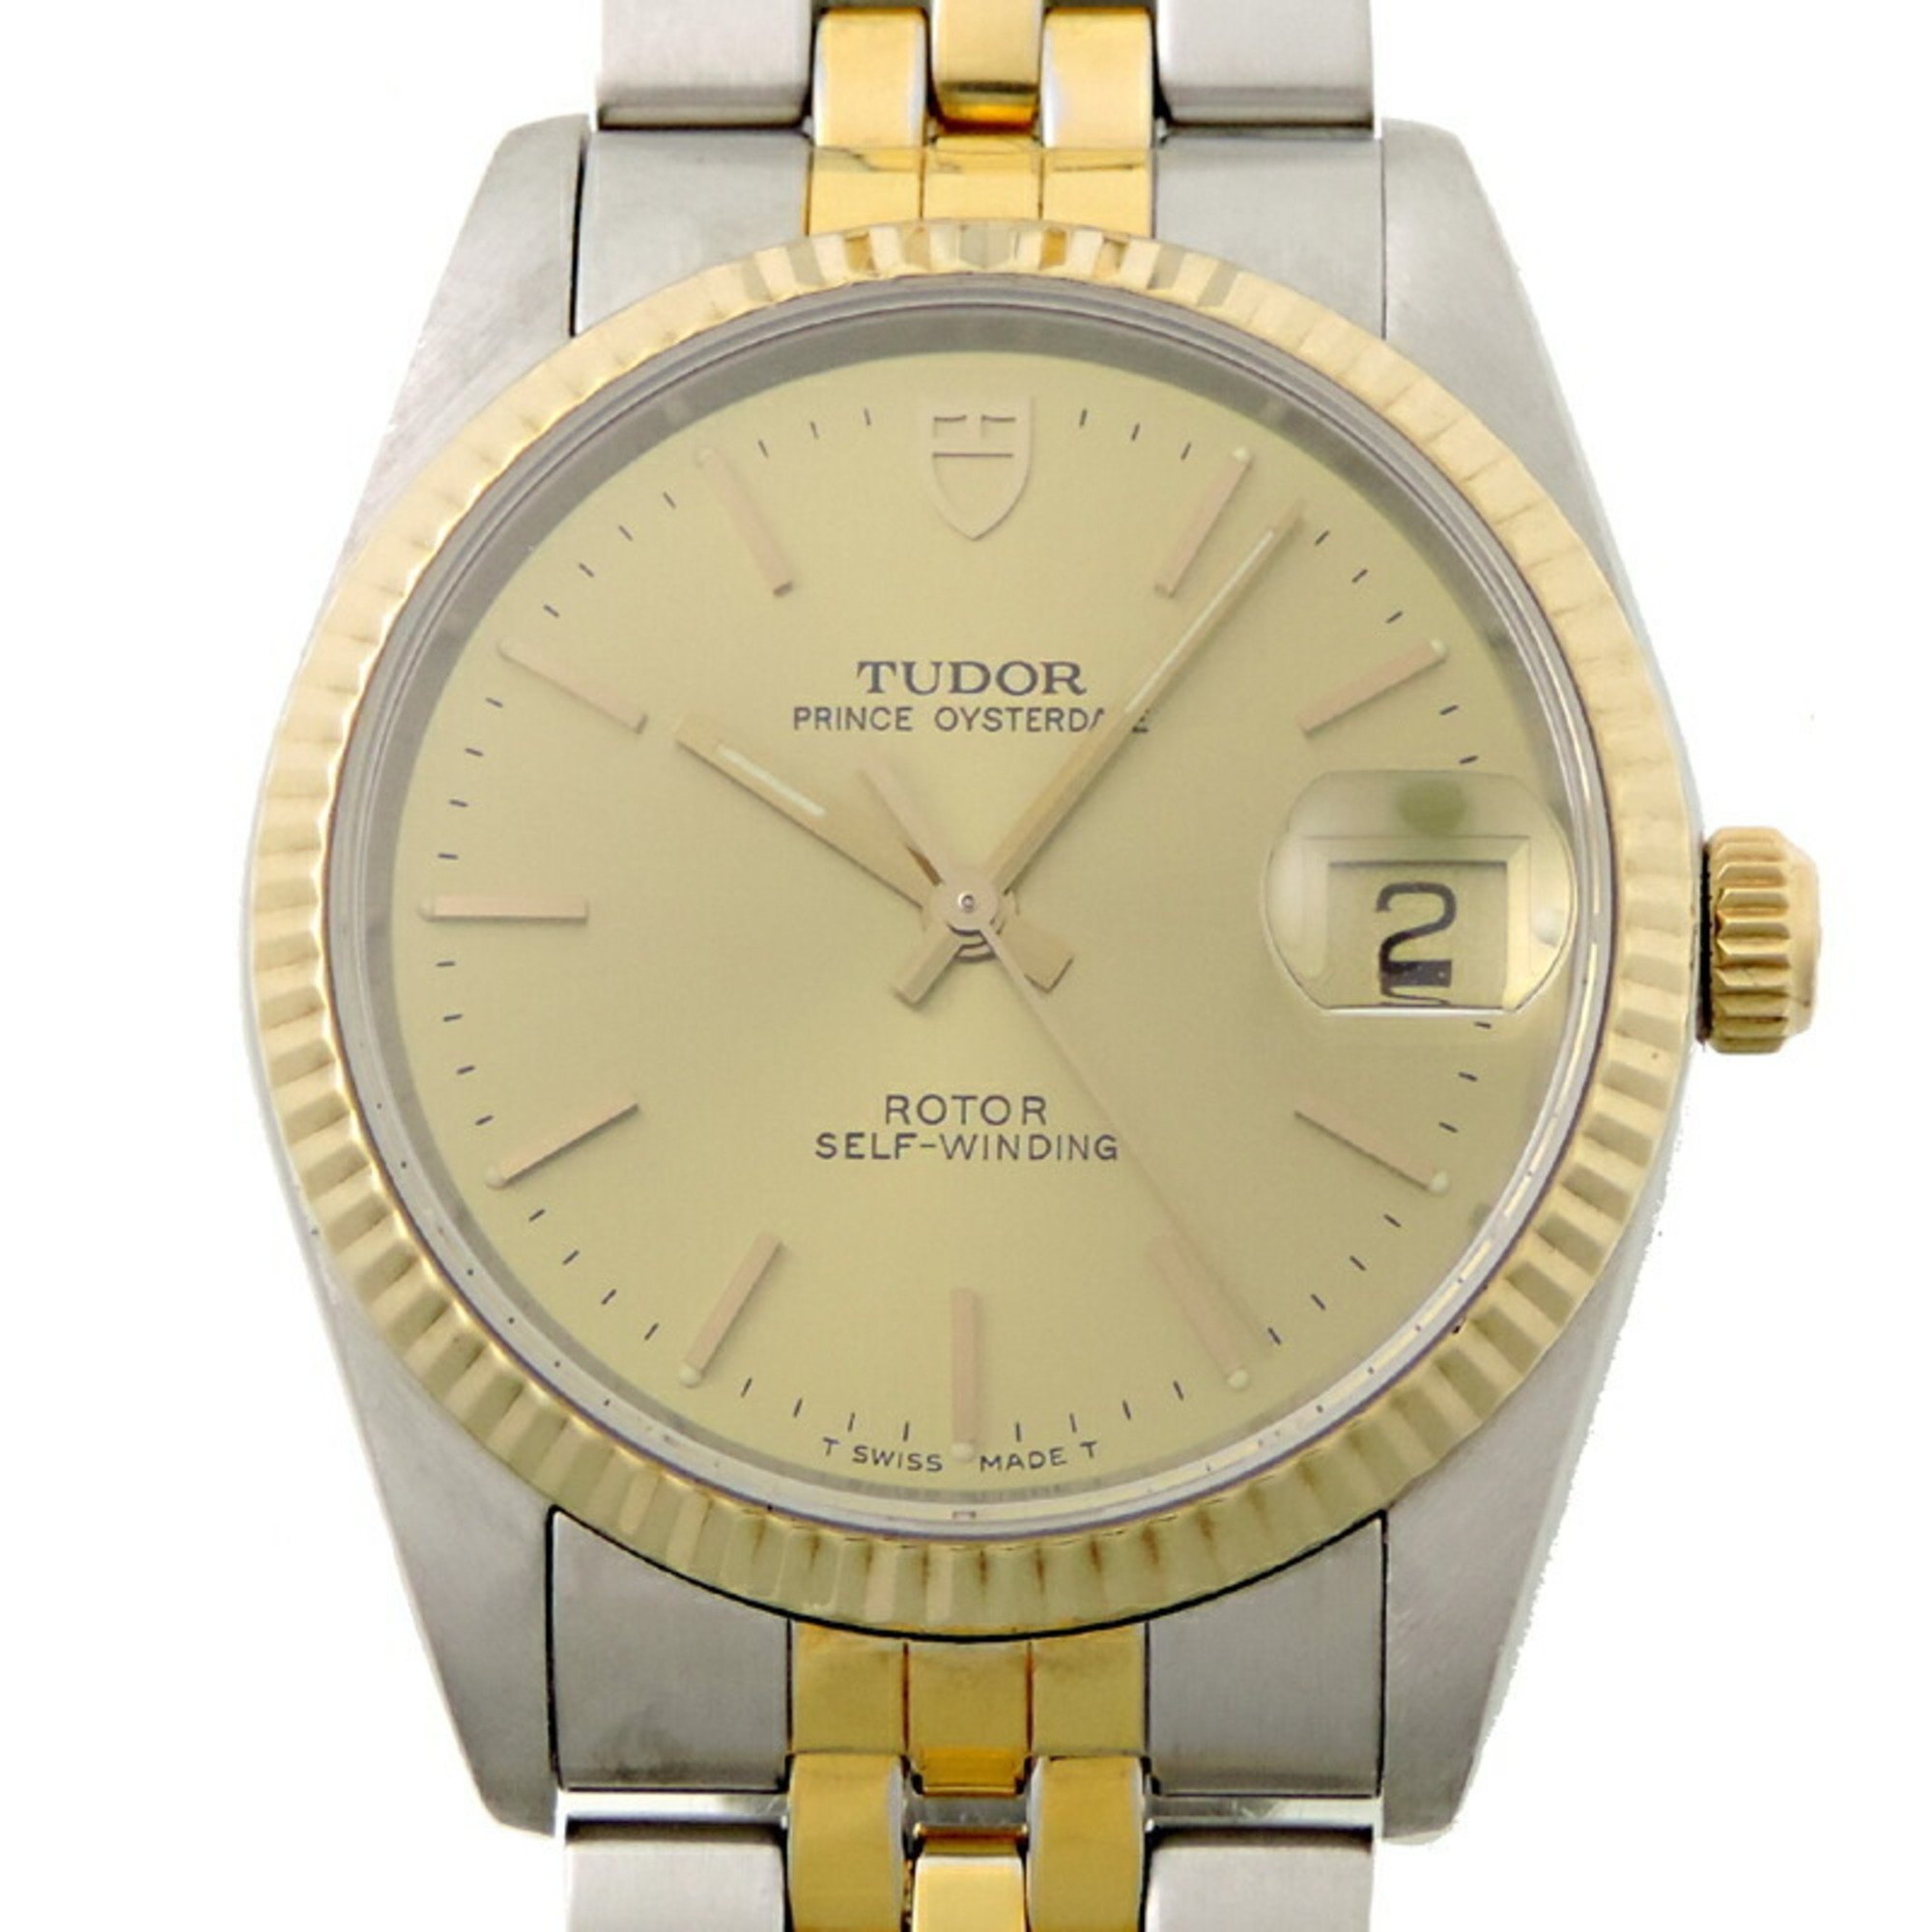 Tudor Prince Oyster Date Men's Watch 74033